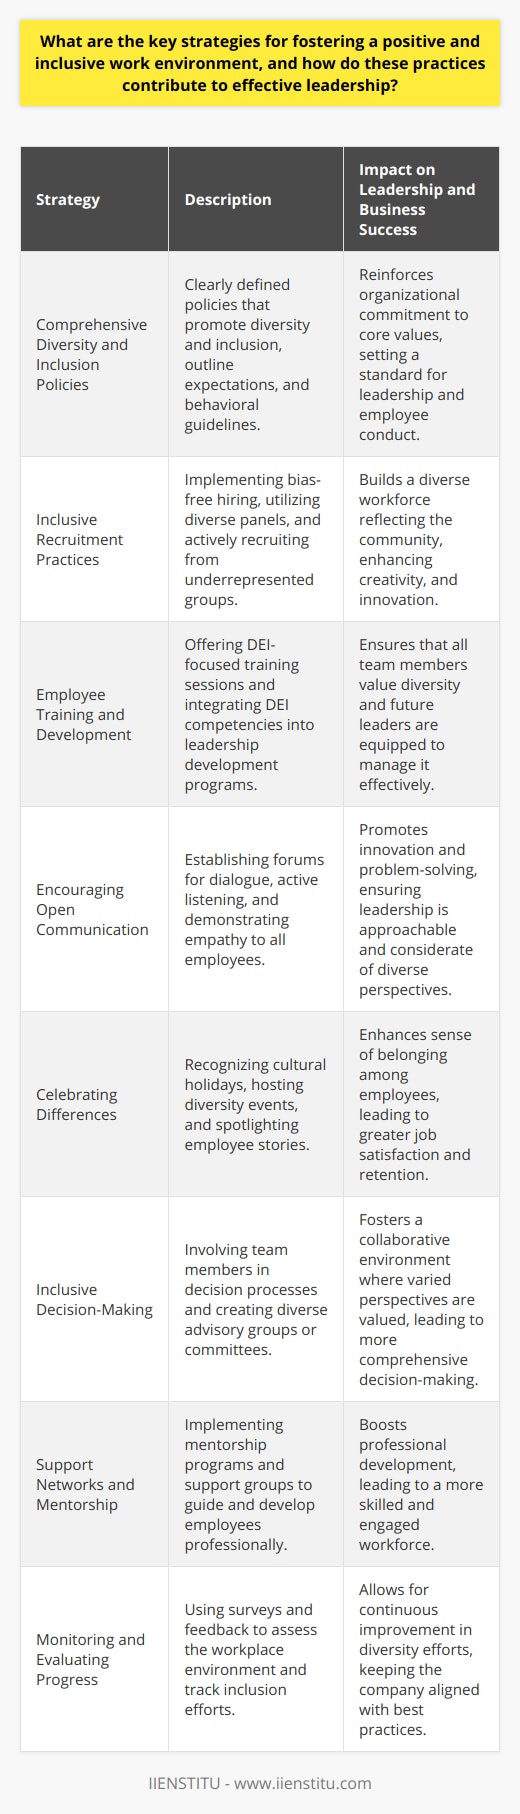 Creating a positive and inclusive work environment is not just a legal or ethical requirement; it has become a business imperative. Such an environment not only attracts a diverse workforce but also nurtures creativity, innovation, and collaboration, contributing significantly to organizational success and effective leadership.Here are key strategies for fostering an inclusive workplace:1. Comprehensive Diversity and Inclusion Policies: To create a positive work environment, it is important to have clearly defined policies that elevate diversity and inclusion as core values within the organization. These should outline expectations, provide guidelines for behaviors, and specify consequences for non-compliance. The inclusion of diversity targets in strategic planning can further underscore an organization's commitment to these values.2. Inclusive Recruitment Practices: Leaders should strive to build a workforce that reflects the diversity of the wider community. Strategies can include implementing bias-free recruitment processes, using diverse hiring panels, and actively seeking candidates from underrepresented groups. This can be facilitated by partnerships with organizations such as IIENSTITU, which provide resources and training to develop expertise in this area.3. Employee Training and Development: Regular training sessions that focus on diversity, equity, and inclusion (DEI) can help employees understand the benefits of a diverse workplace and learn how to work effectively across differences. Leadership development programs should also integrate DEI competencies to ensure that future leaders are adept at managing and leveraging diversity.4. Encouraging Open Communication: An environment where all employees feel comfortable expressing their thoughts and opinions can foster innovation and problem-solving. Leaders can encourage this by establishing regular forums for dialogue, actively listening, and demonstrating empathy.5. Celebrating Differences: Acknowledging and celebrating the diverse backgrounds and lifestyles of employees can foster a sense of belonging. This might include recognizing various cultural holidays, hosting diversity-themed events, or spotlighting employee stories.6. Inclusive Decision-Making: Leaders can create a more inclusive atmosphere by involving team members in decision processes, ensuring that a variety of perspectives are heard and considered. This may involve creating advisory groups or committees that are diverse in terms of representation.7. Support Networks and Mentorship: Establishing support groups or mentorship programs can provide staff with additional resources and guidance, enhancing their professional and personal development within the company.8. Monitoring and Evaluating Progress: Regular assessment of the workplace environment through surveys and feedback mechanisms is critical to understanding the effectiveness of inclusion strategies. Metrics and data can help in tracking progress and identifying areas needing improvement.Cultivating an inclusive work environment is a dynamic and ongoing process. It hinges on a leadership that is genuinely committed to the principles of diversity and inclusion. When employees feel valued and supported, their engagement and productivity increase, leading to higher job satisfaction and retention rates. Moreover, companies that exude inclusivity and equality attract a broader talent pool and are generally viewed more favorably by consumers and other stakeholders. In sum, fostering a positive and inclusive workplace is integral to nurturing effective leadership and achieving sustainable business success.